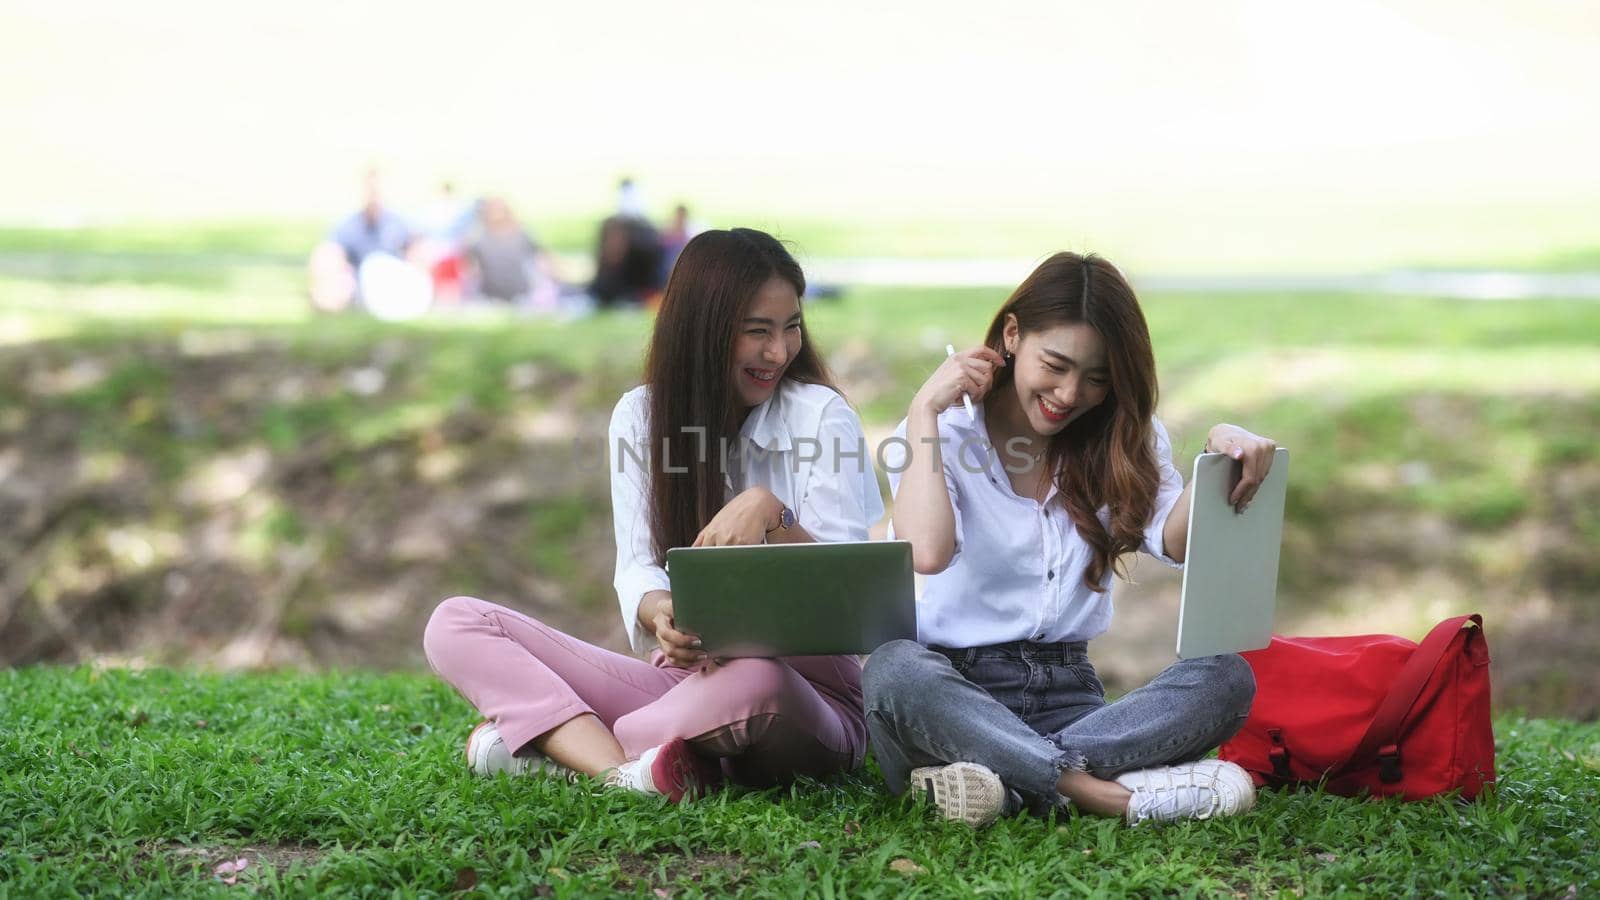 Two cheerful young women sitting on grass in the park and working with computer laptop. by prathanchorruangsak